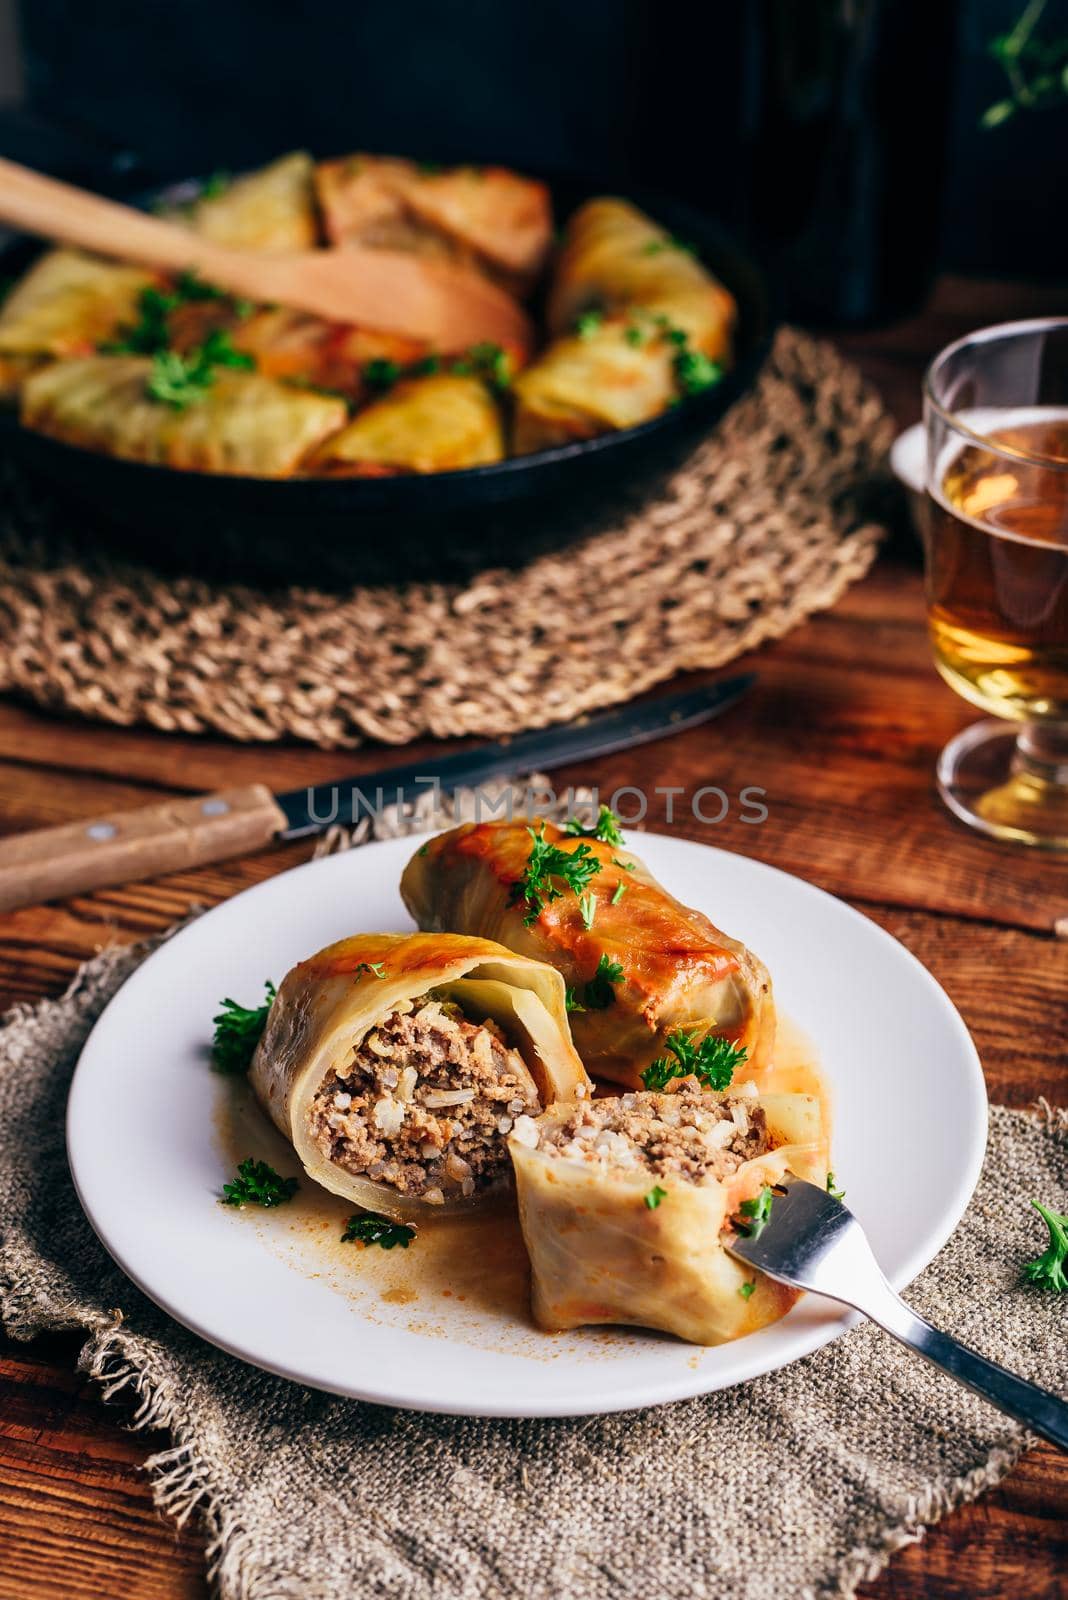 Two Cabbage Rolls Stuffed with Minced Meat by Seva_blsv